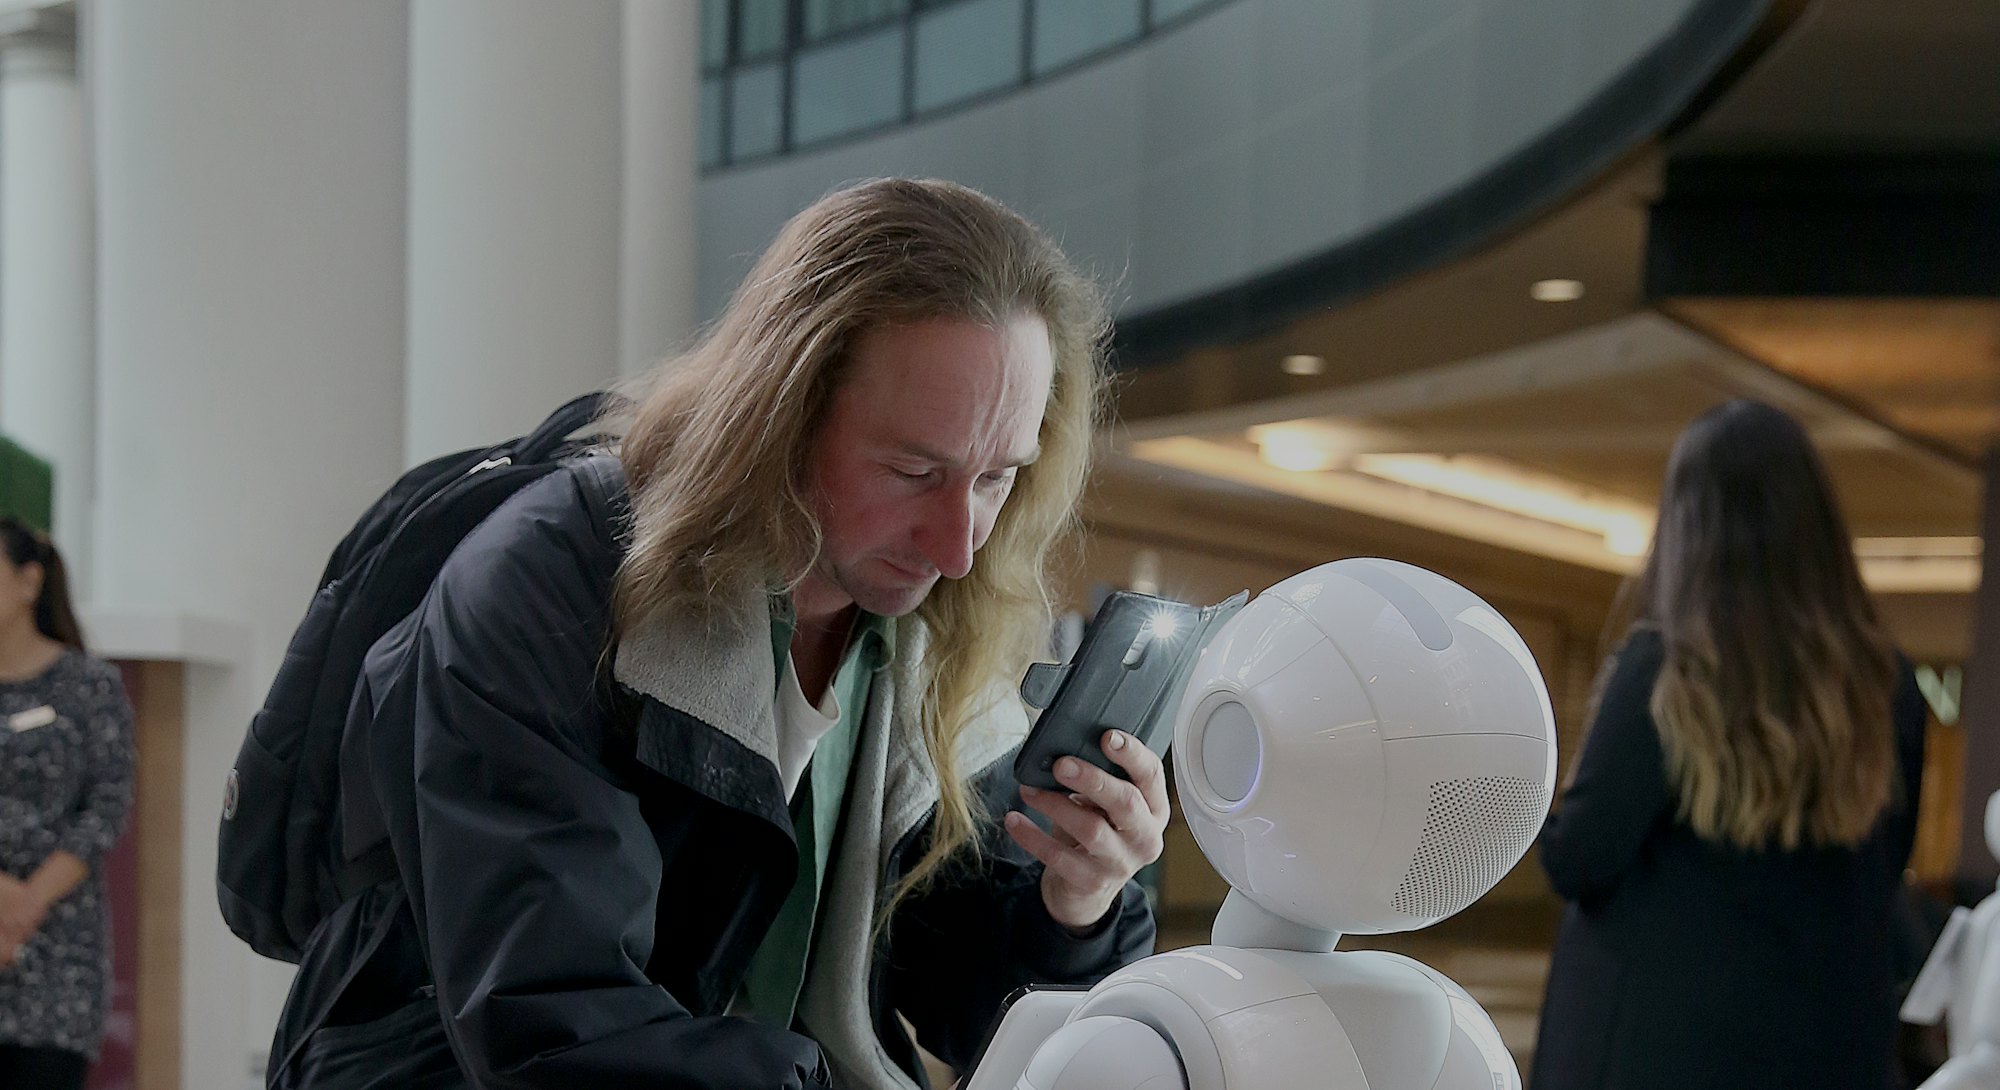 Paul Bartholomew interacts with Pepper, a robot by SoftBank Robotics, which will greet and play game...